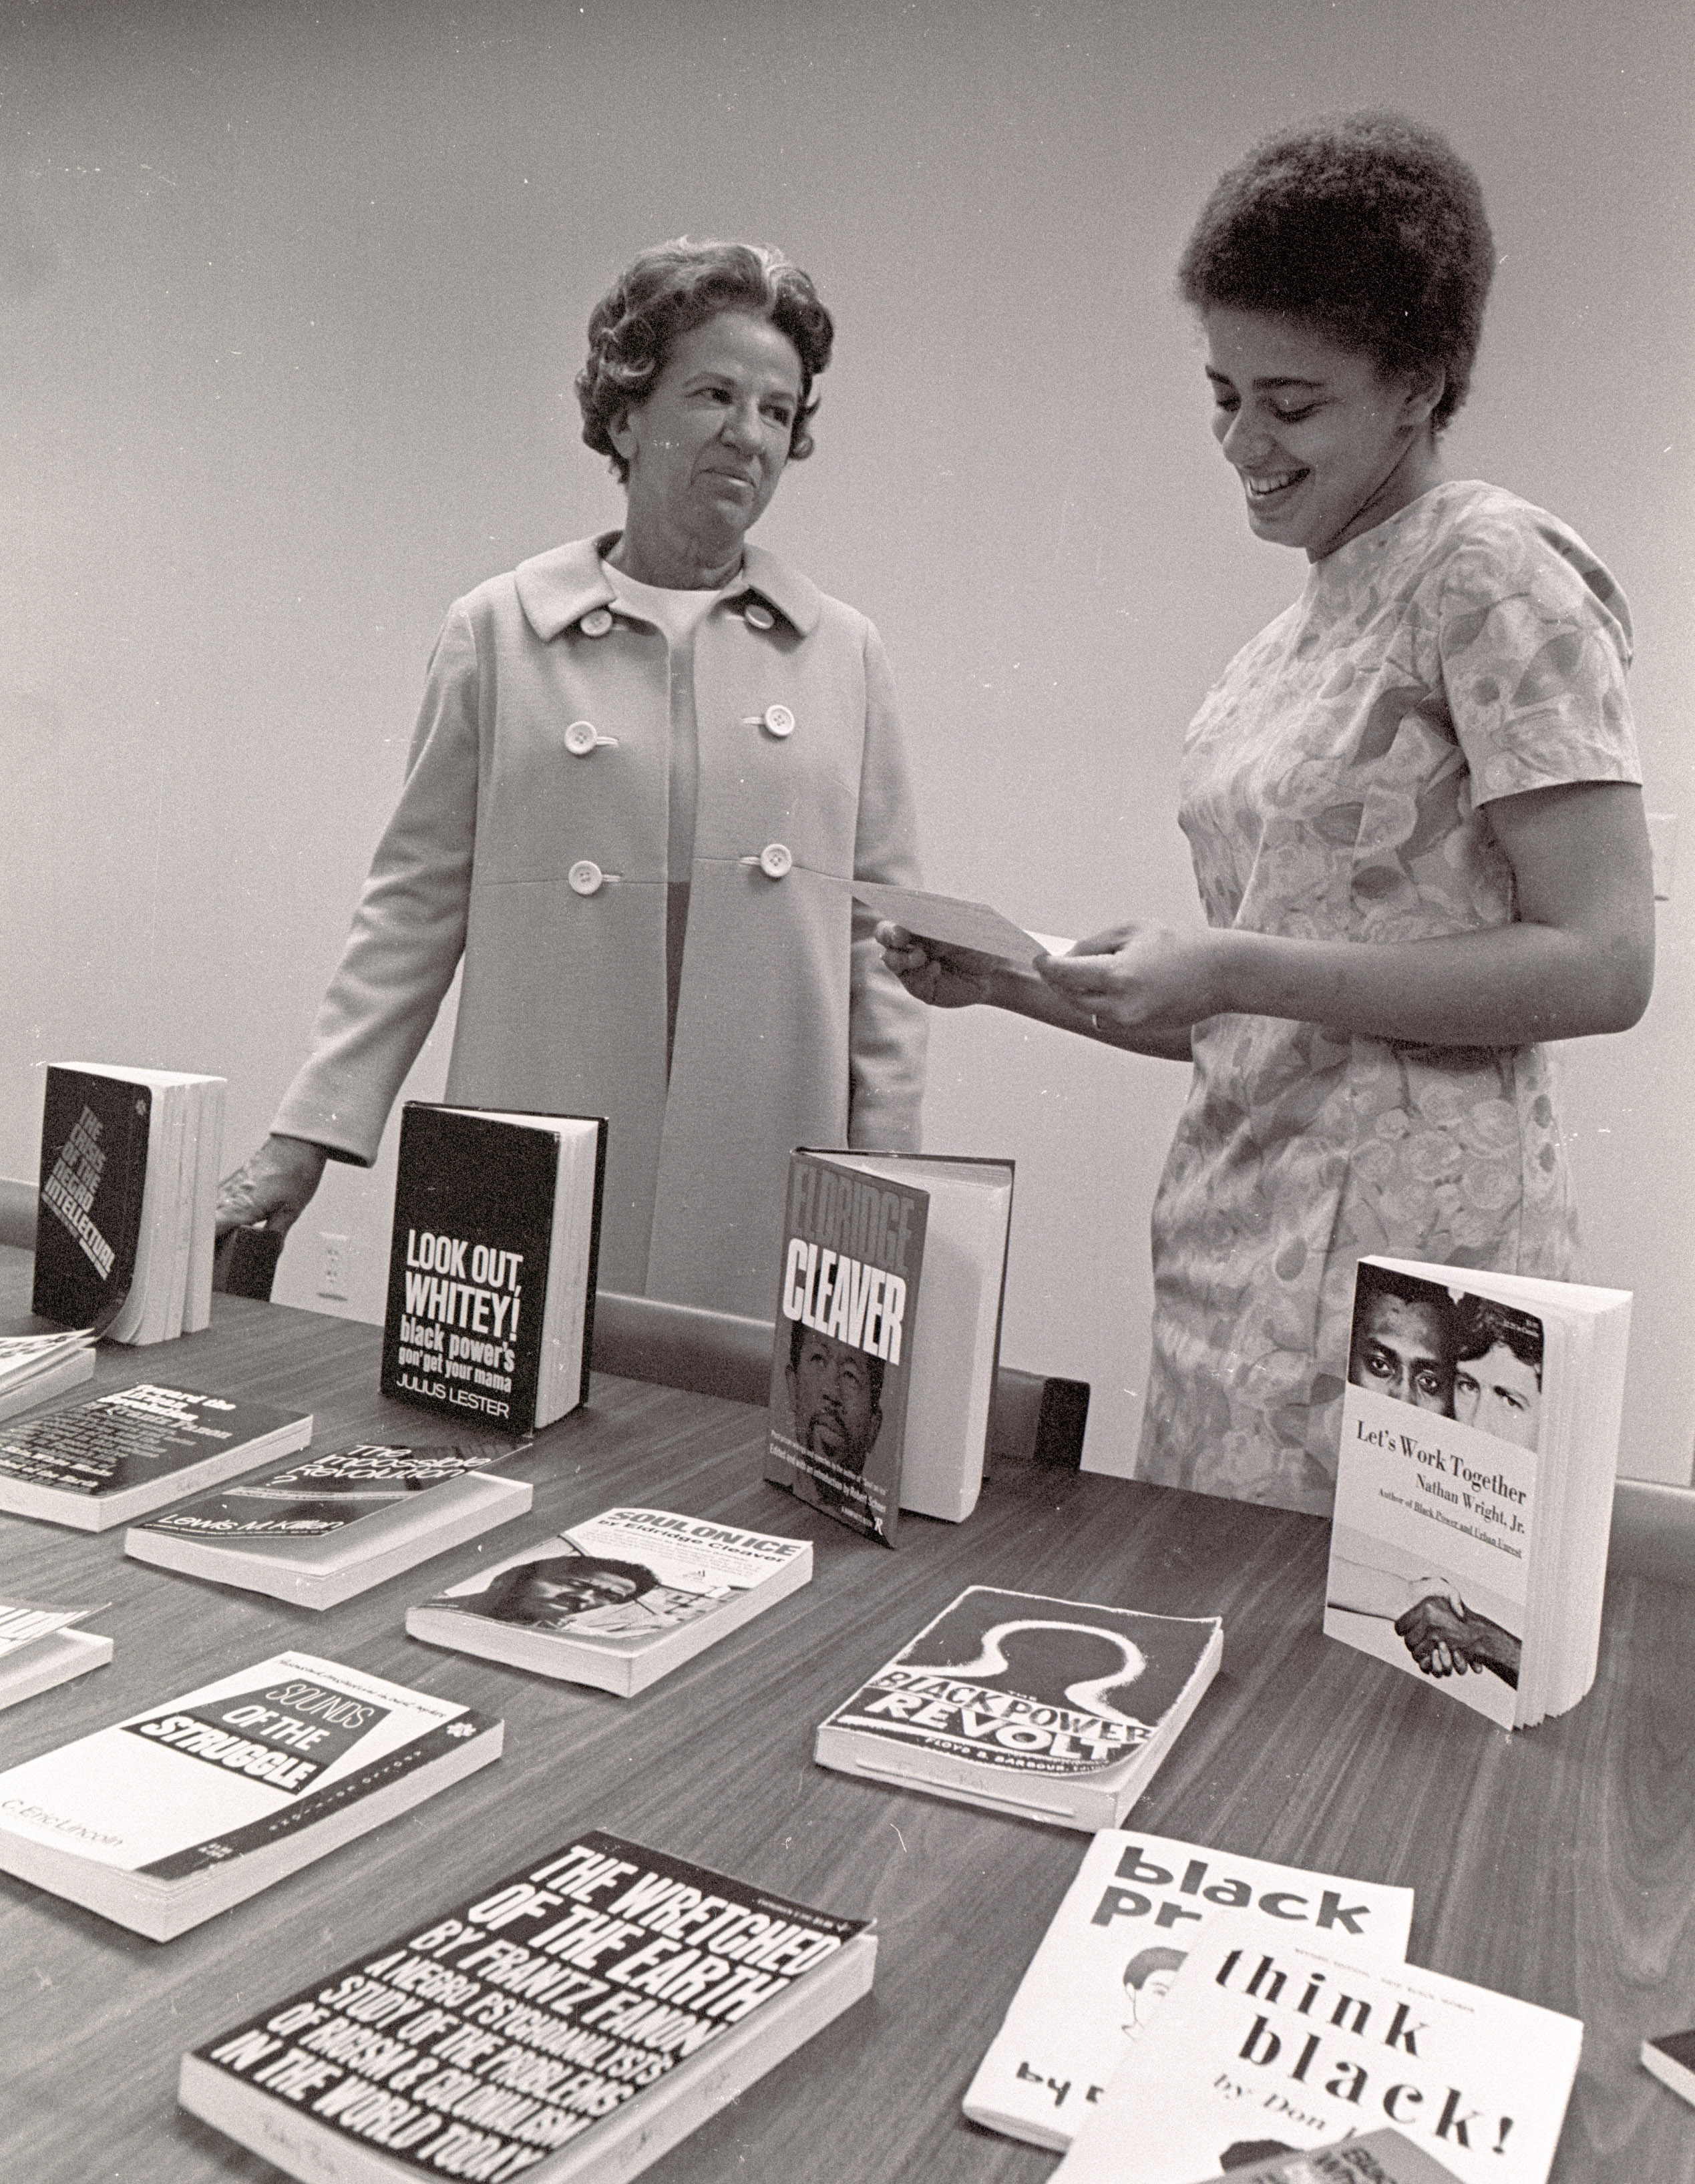 Elizabeth Snyder viewing a collection, 1968. University Archives photos.